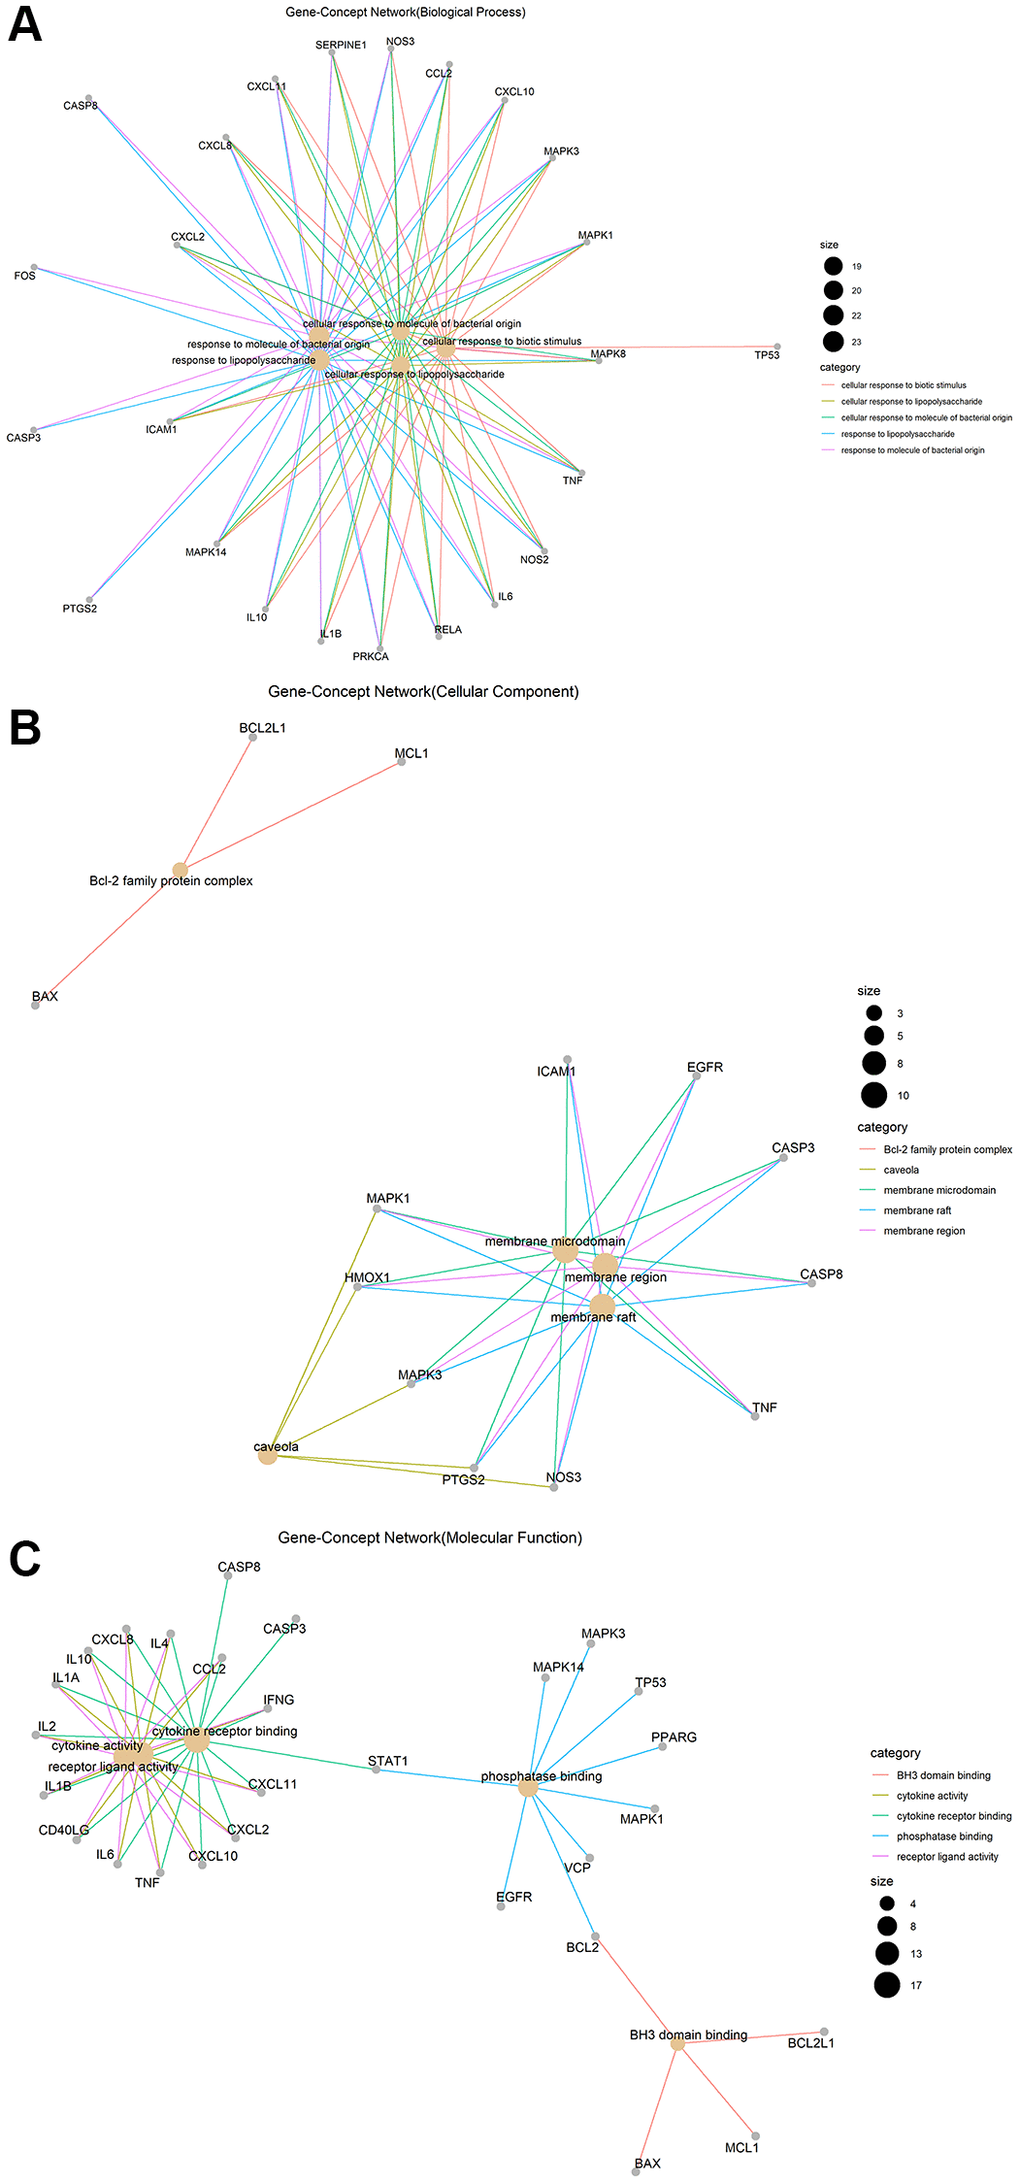 Gene-Concept network of GO enrichment analysis of junction targets of COVID-19 and LHQW. (A) Biological processes. (B) Cellular components. (C) Molecular functions.